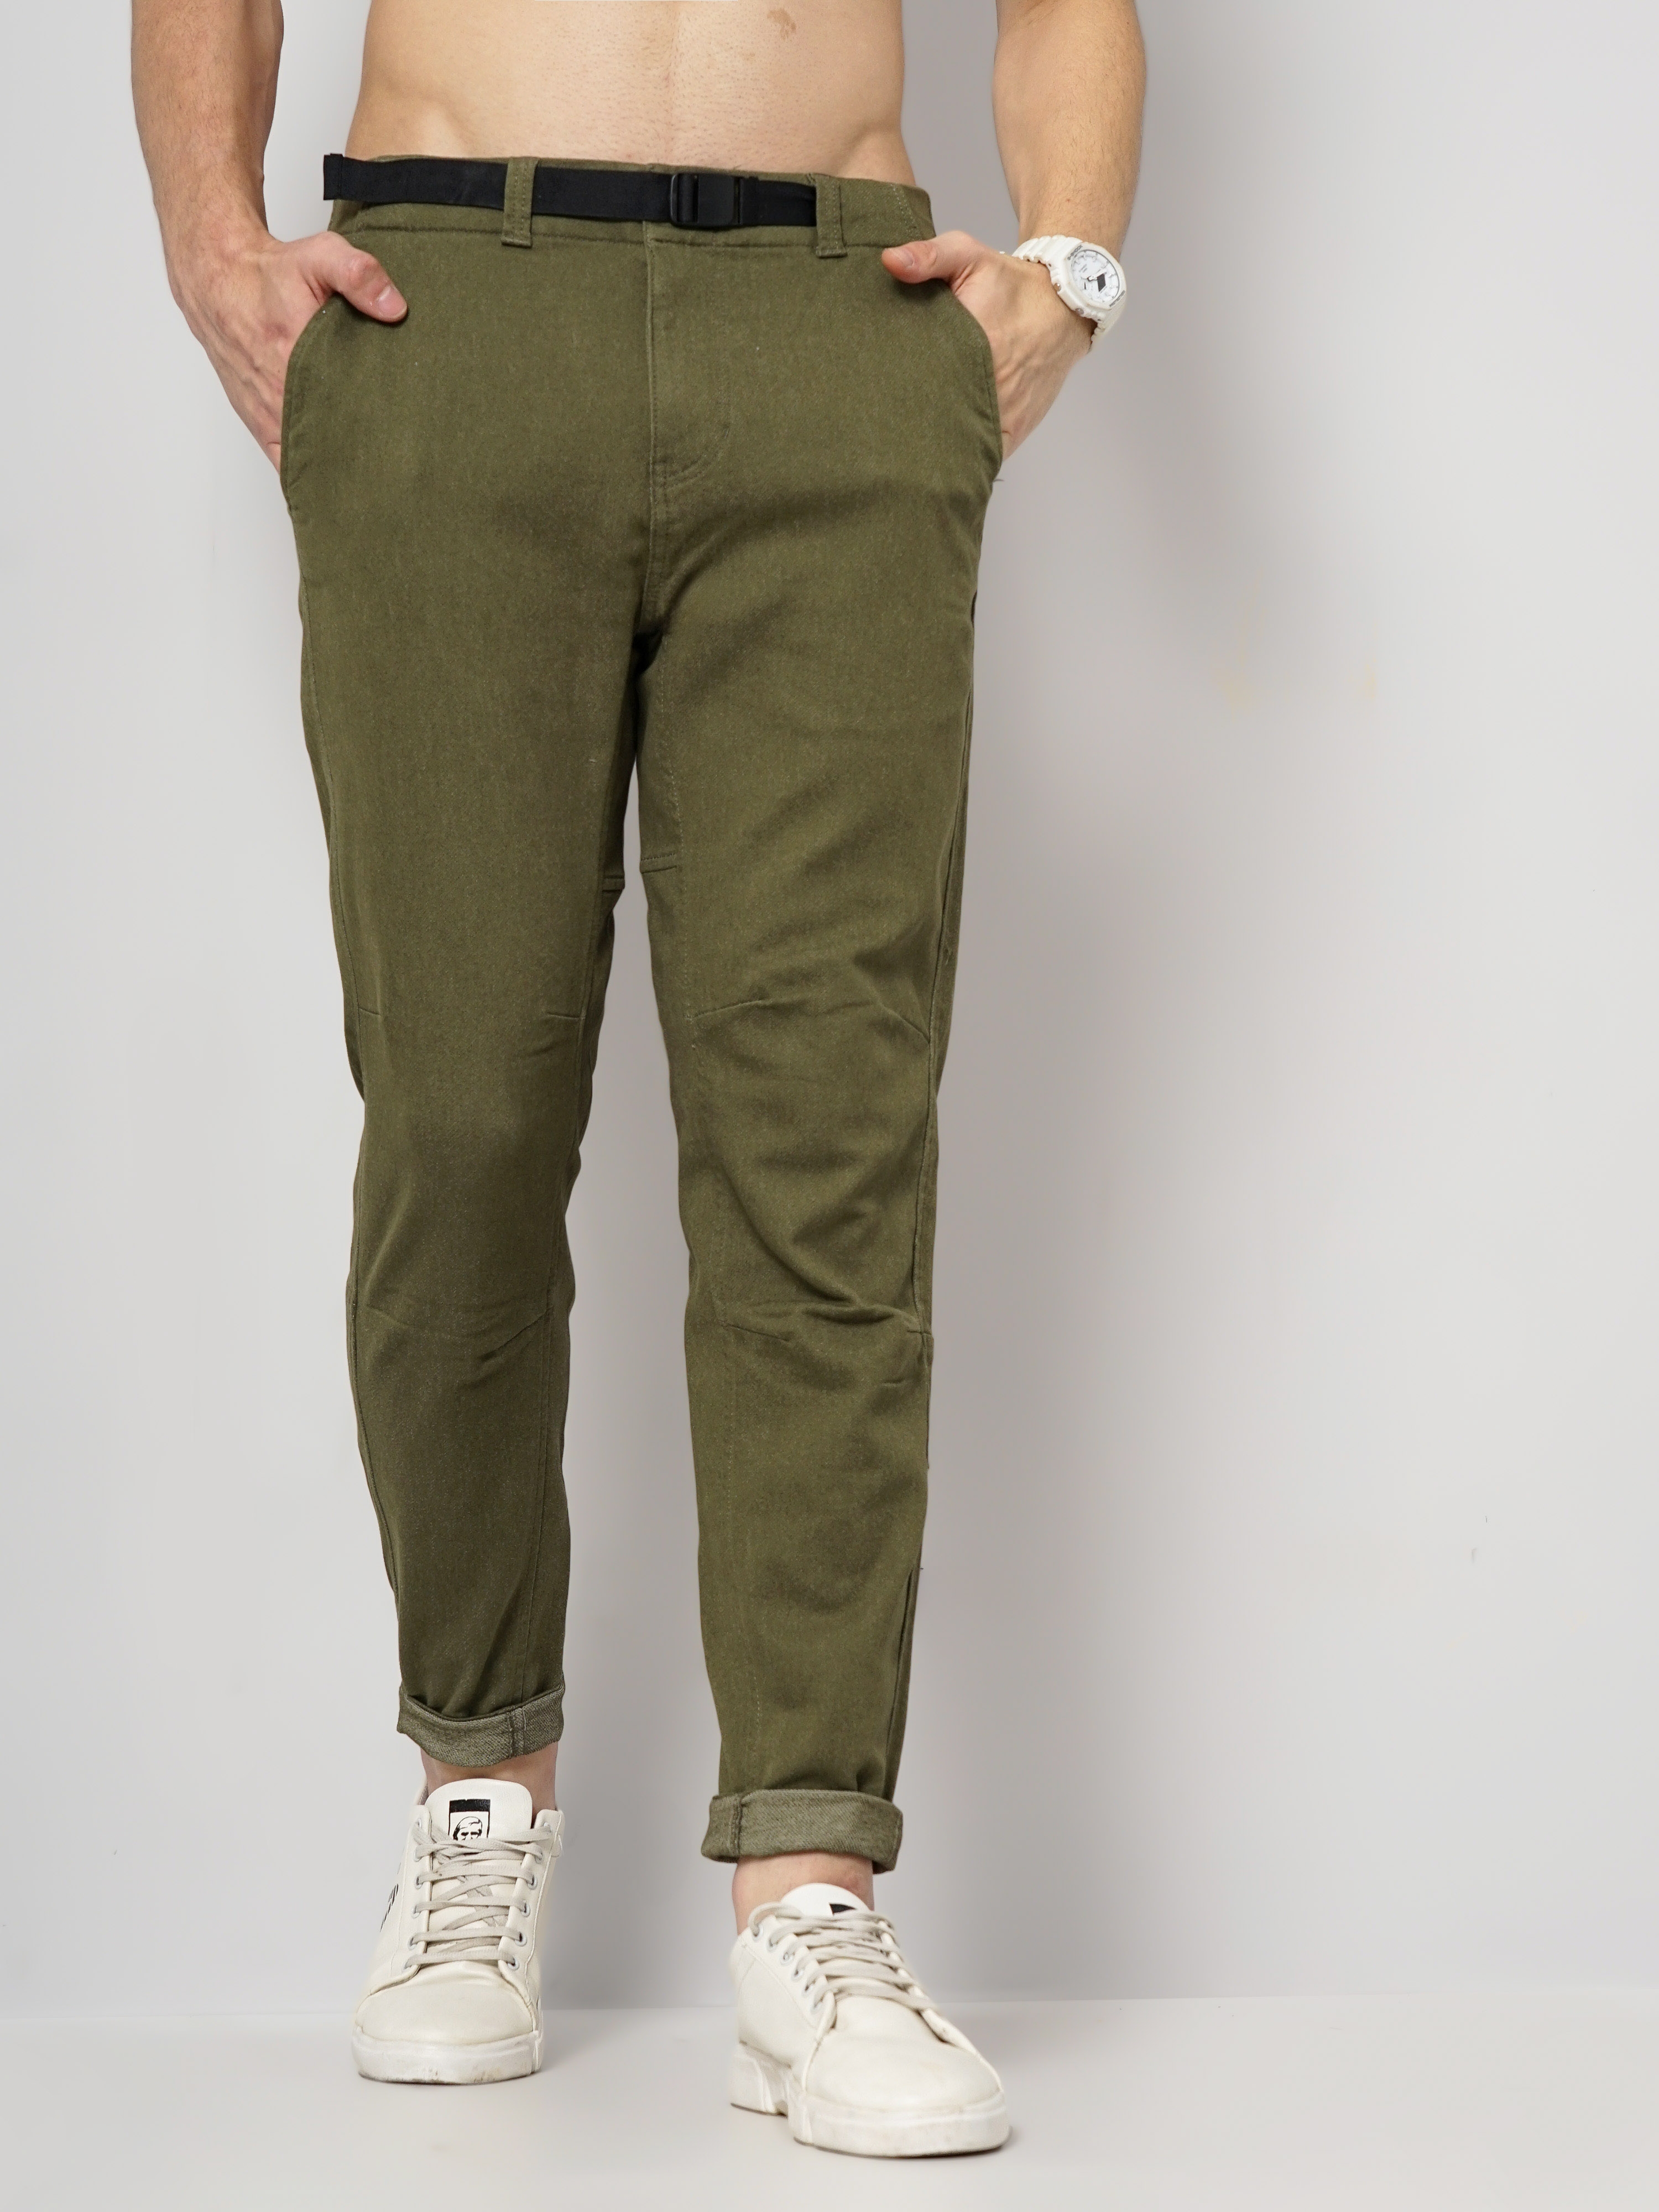 Branded Fashionable Comfortable With Soft Fabric Mens Trendy Green Trousers  Industrial at Best Price in Sidhi | Nehal Men's